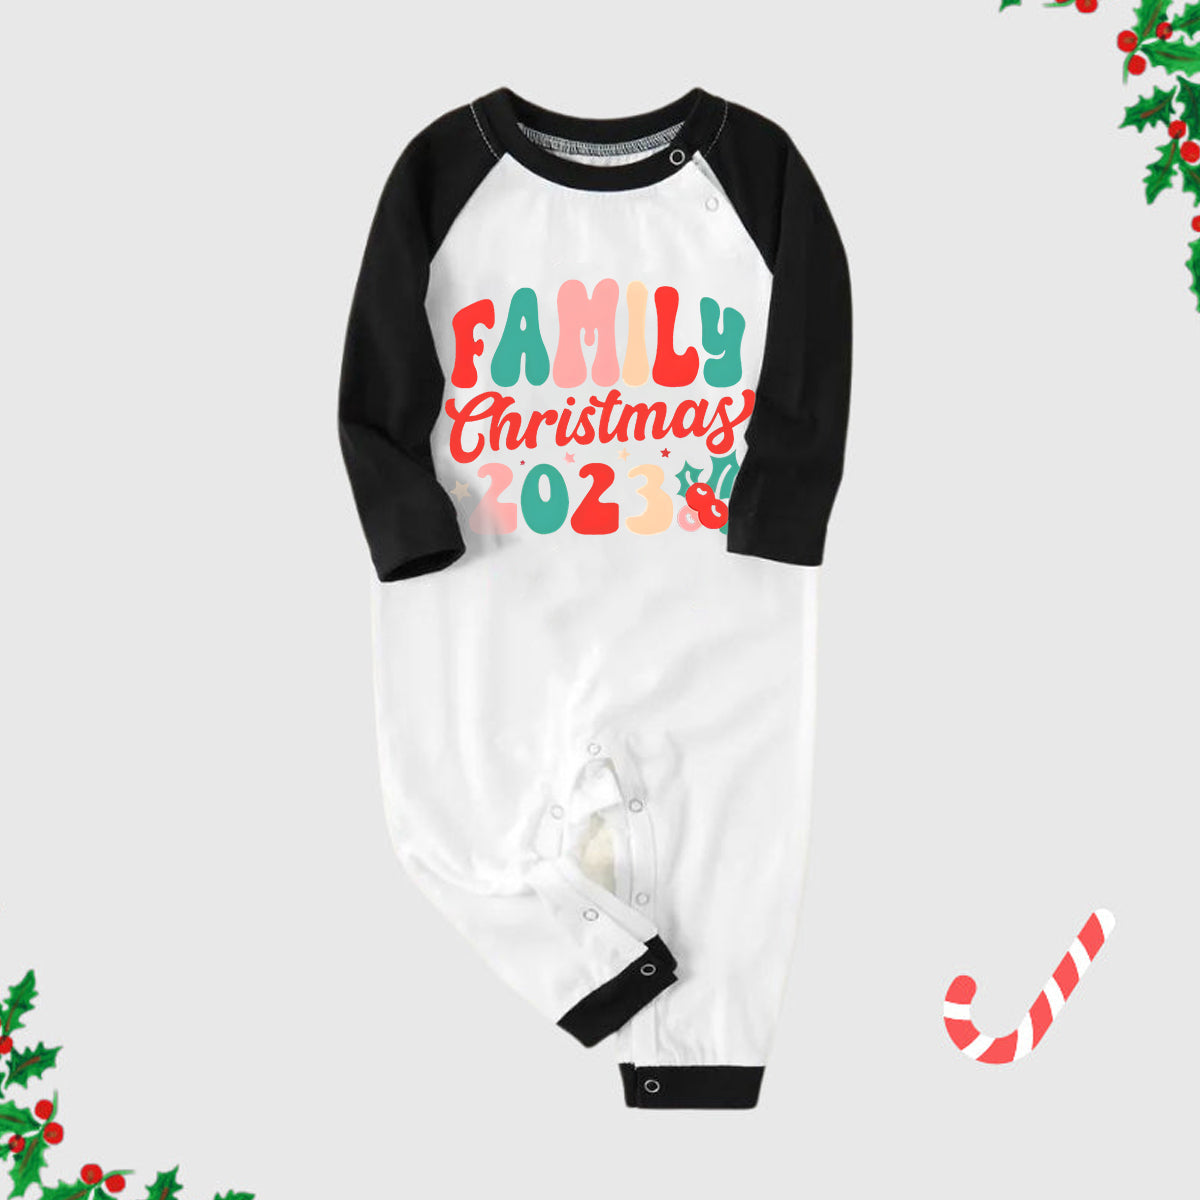 Christmas ‘ Family Christmas 2023’ Letter Print Patterned Casual Long Sleeve Sweatshirts Black Contrast Top and Black and Gren Plaid Pants Family Matching Pajamas Sets With Dog Bandana